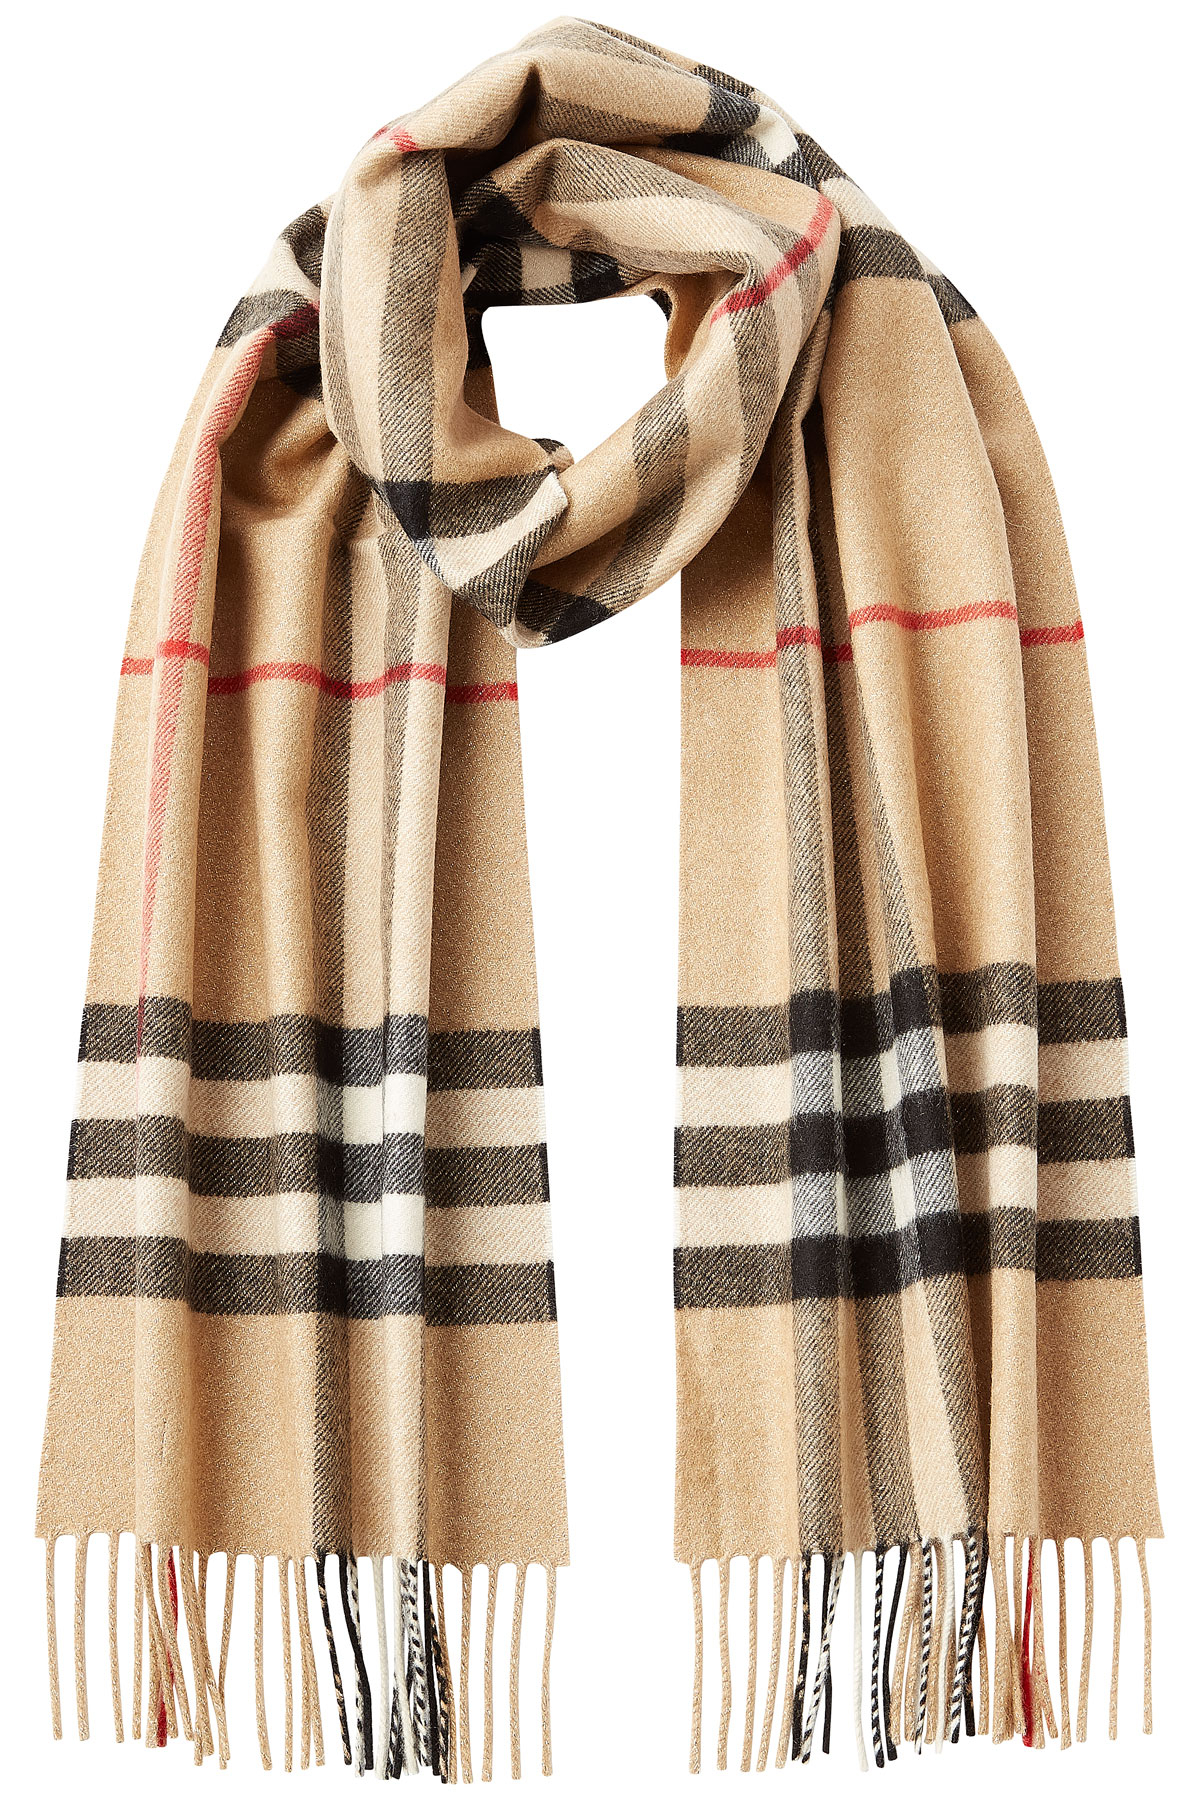 Burberry Cashmere Giant Check Scarf - Multicolor in Natural | Lyst